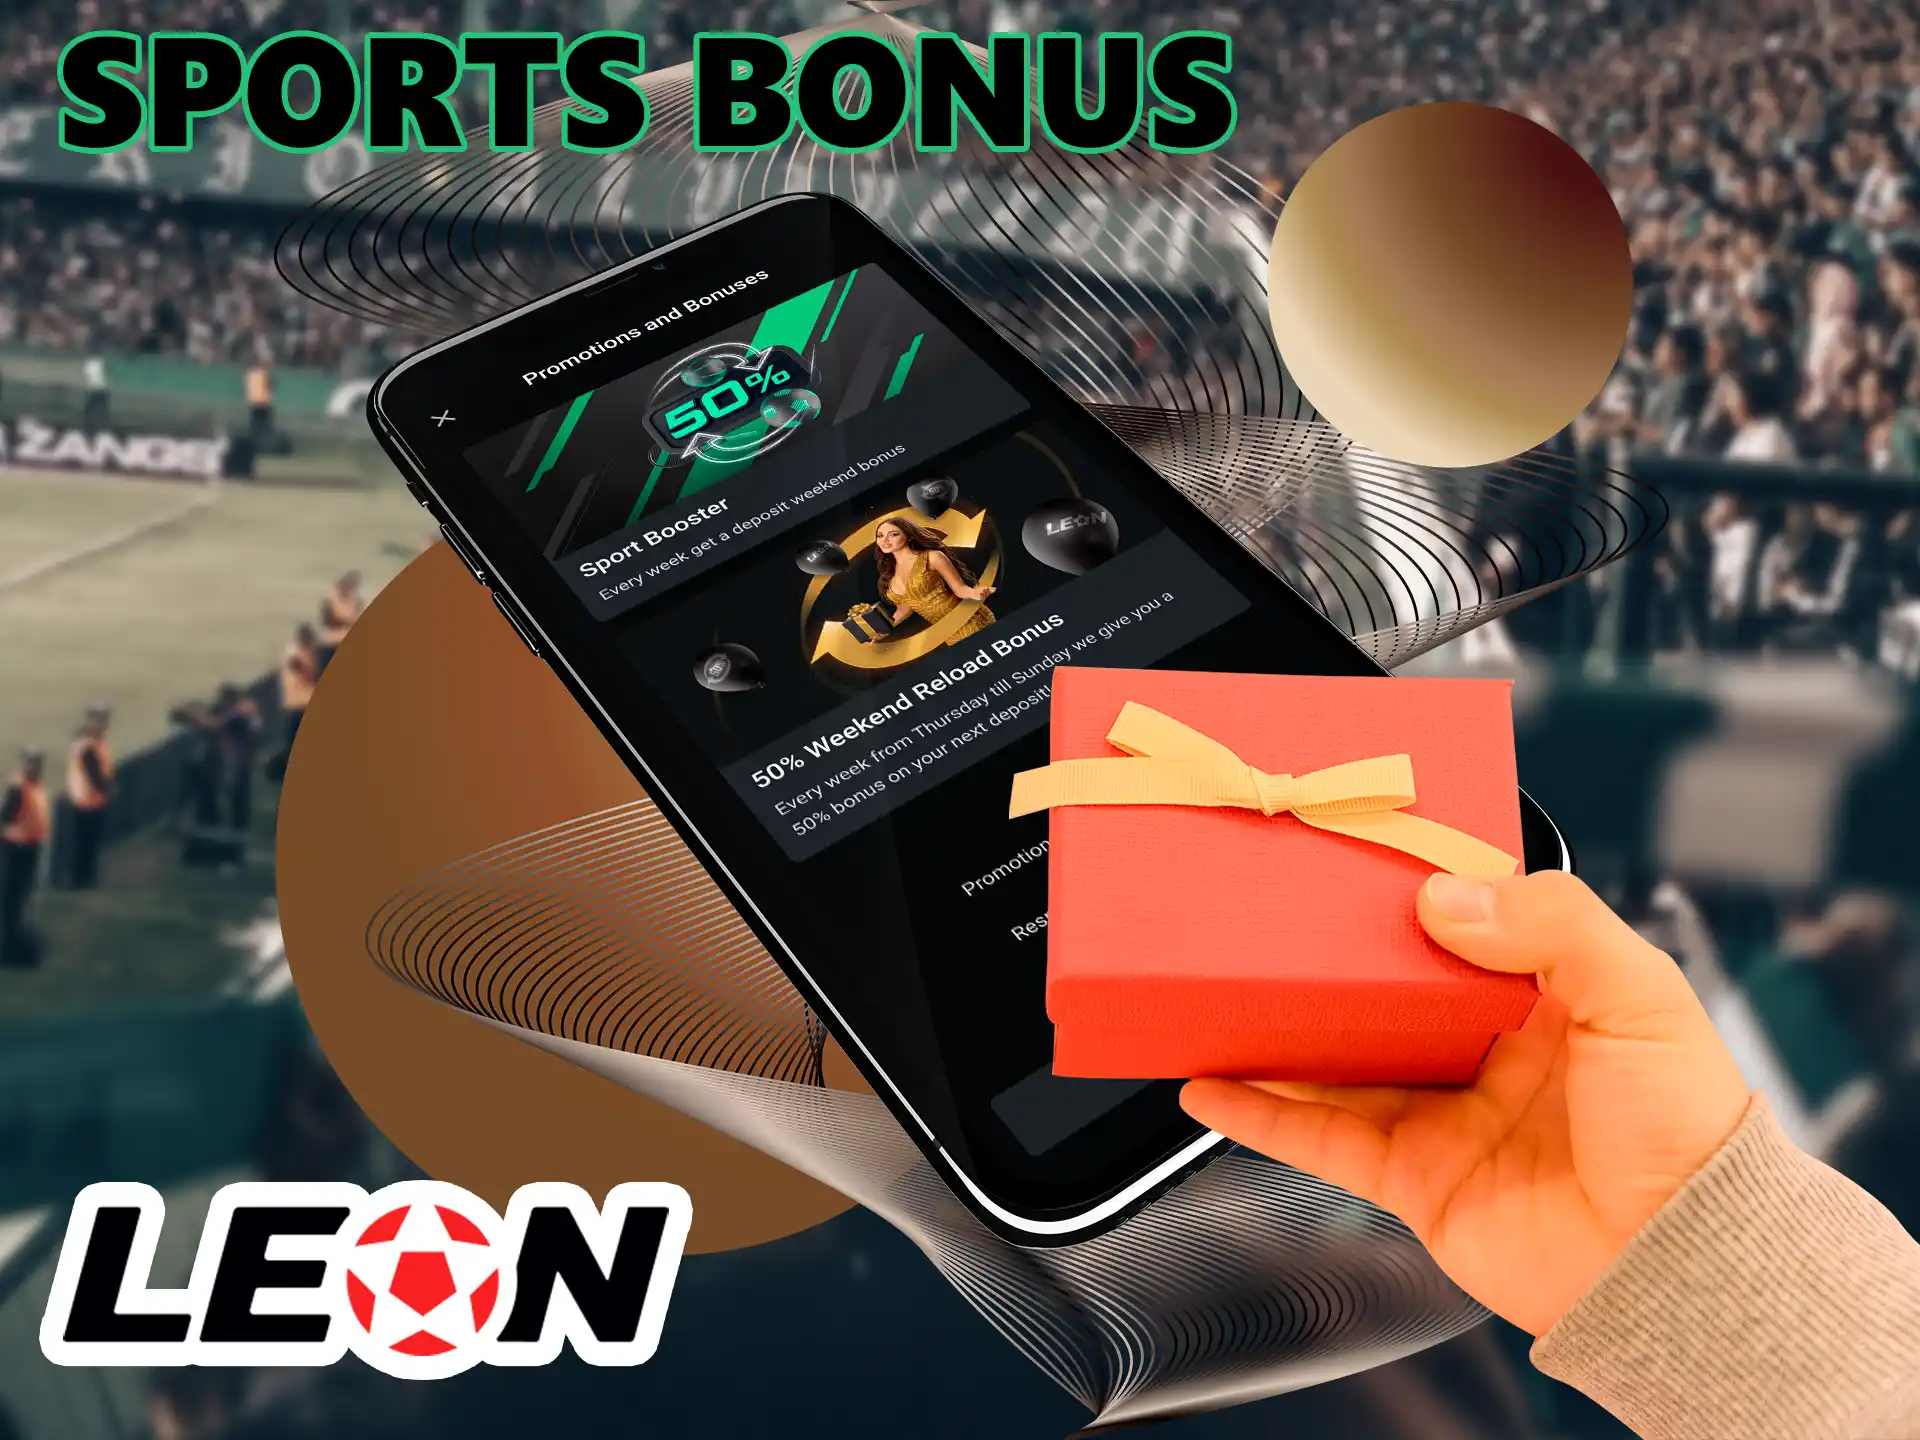 Leon Bet is offering a unique offer, deposit 1,100 BDT into your account and get a free bet of 1,700 BDT on your personal virtual account.